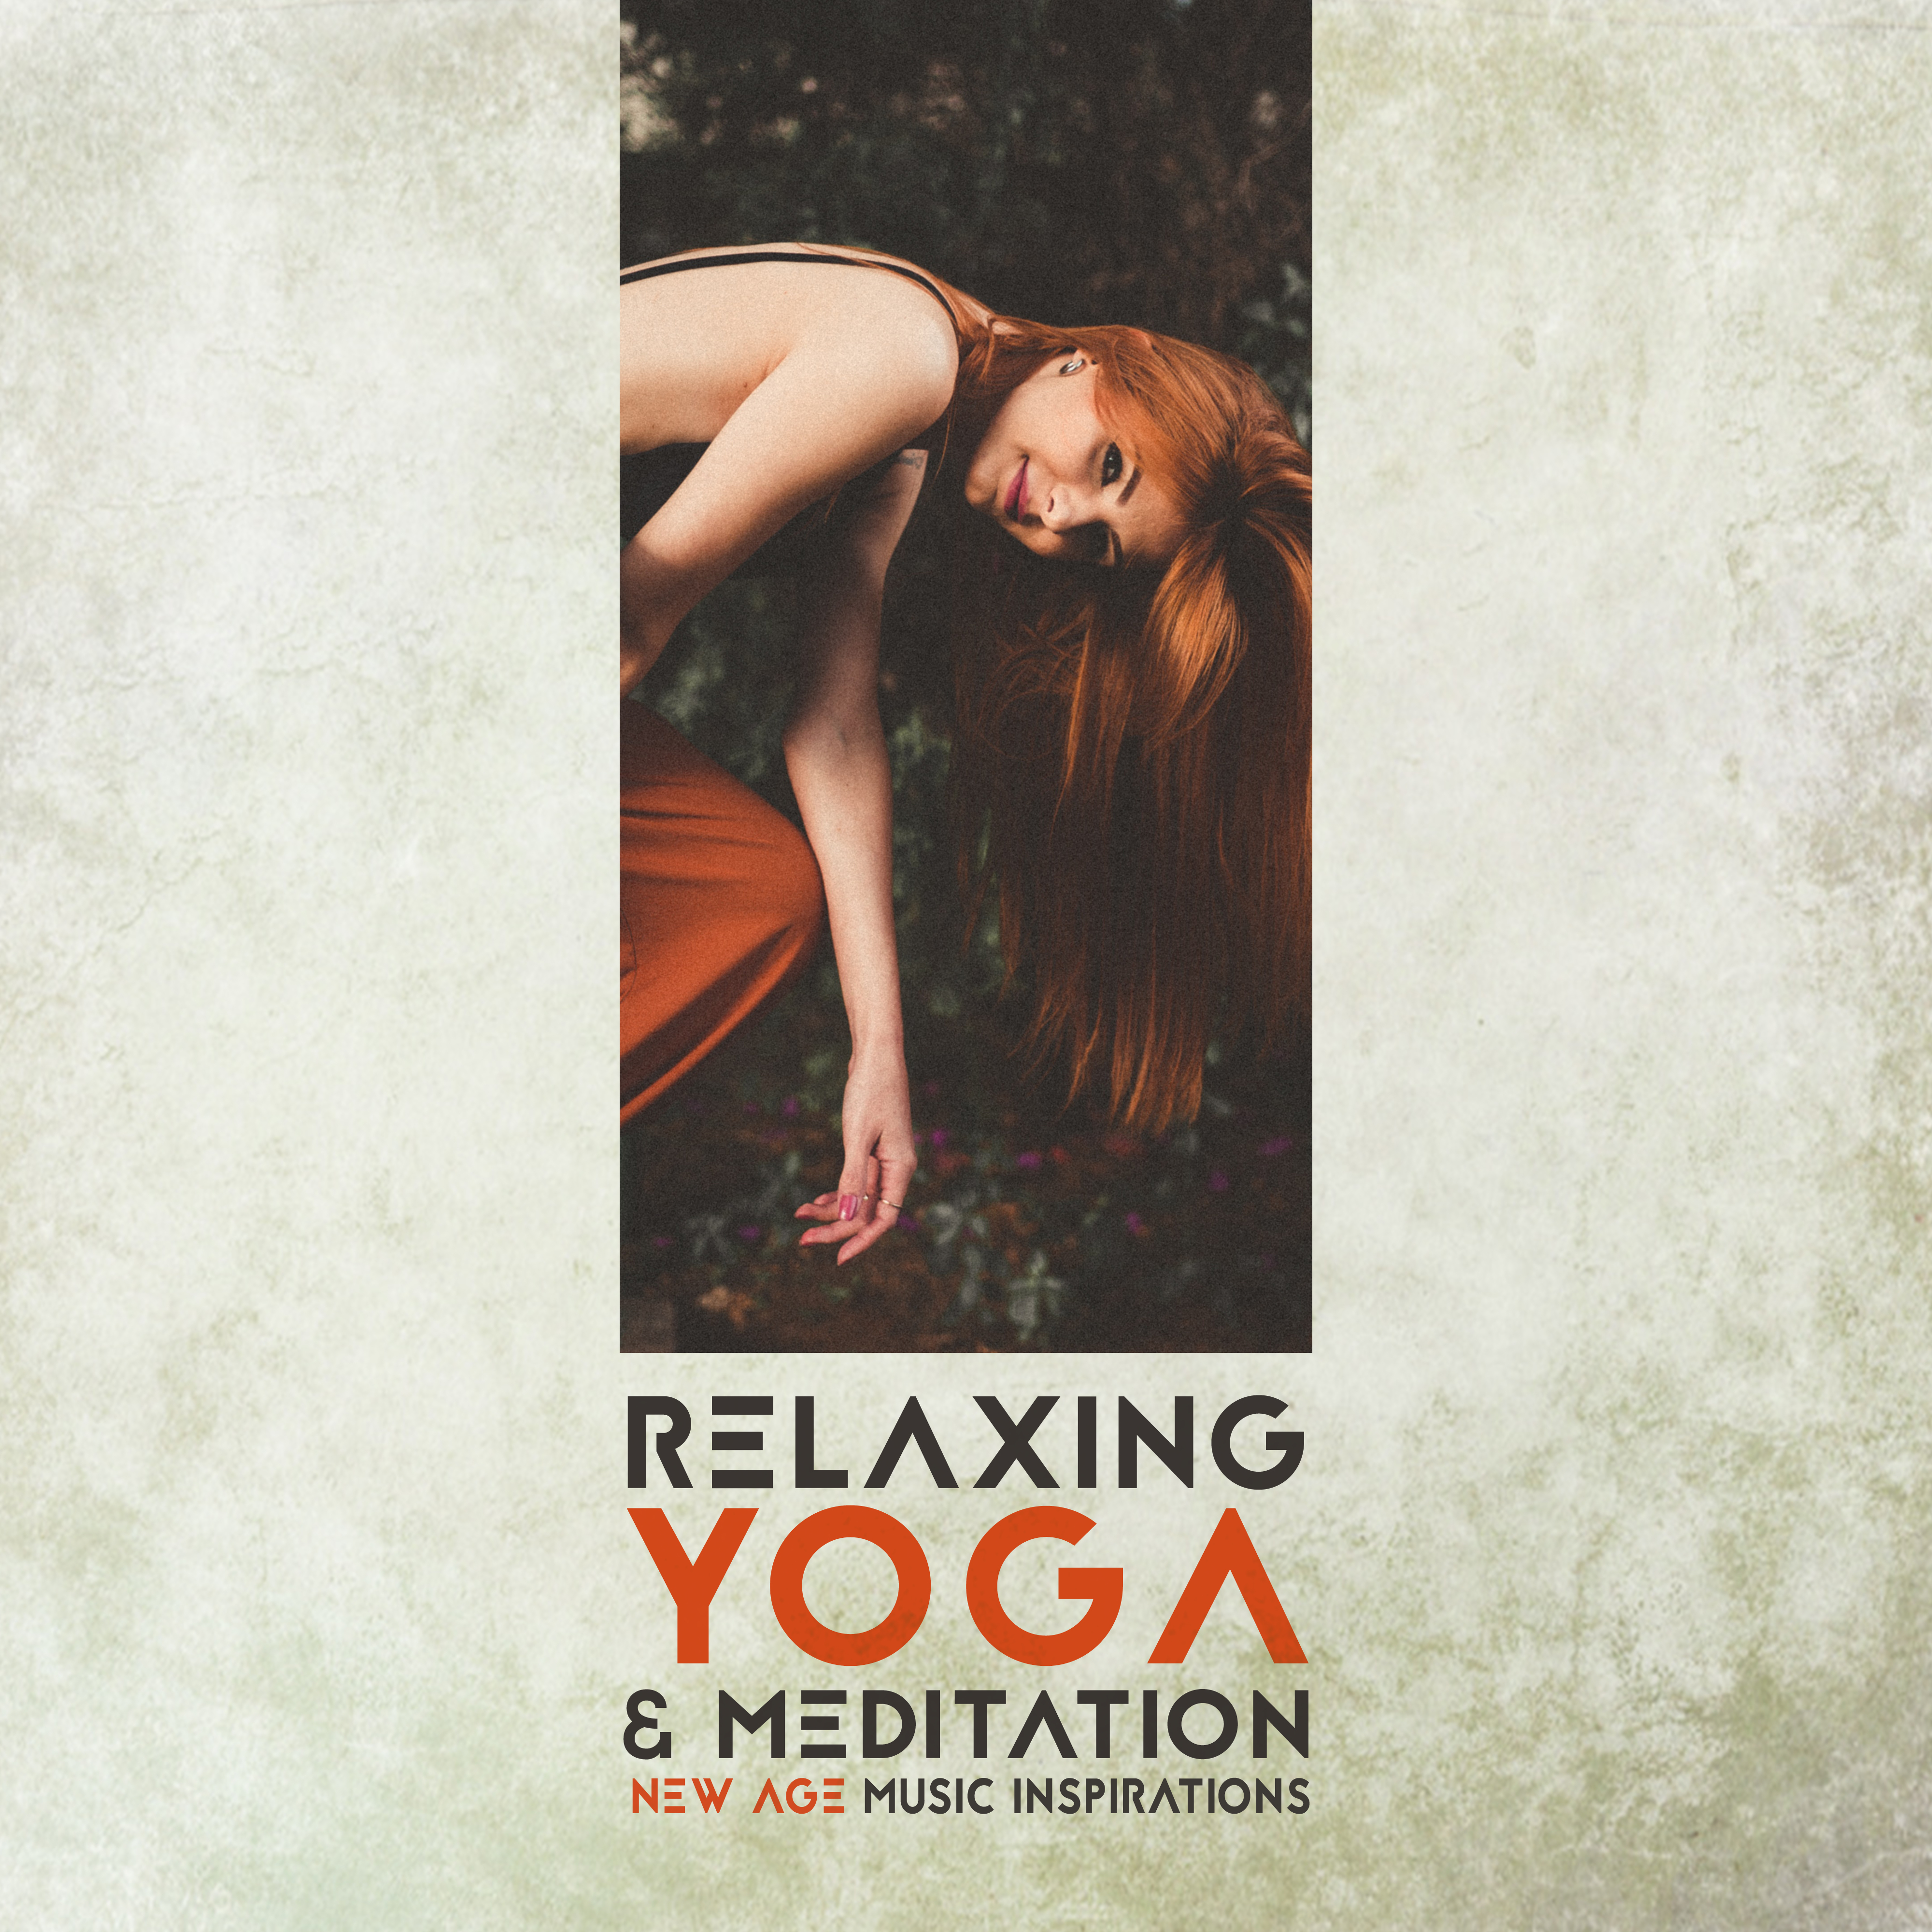 Relaxing Yoga & Meditation New Age Music Inspirations